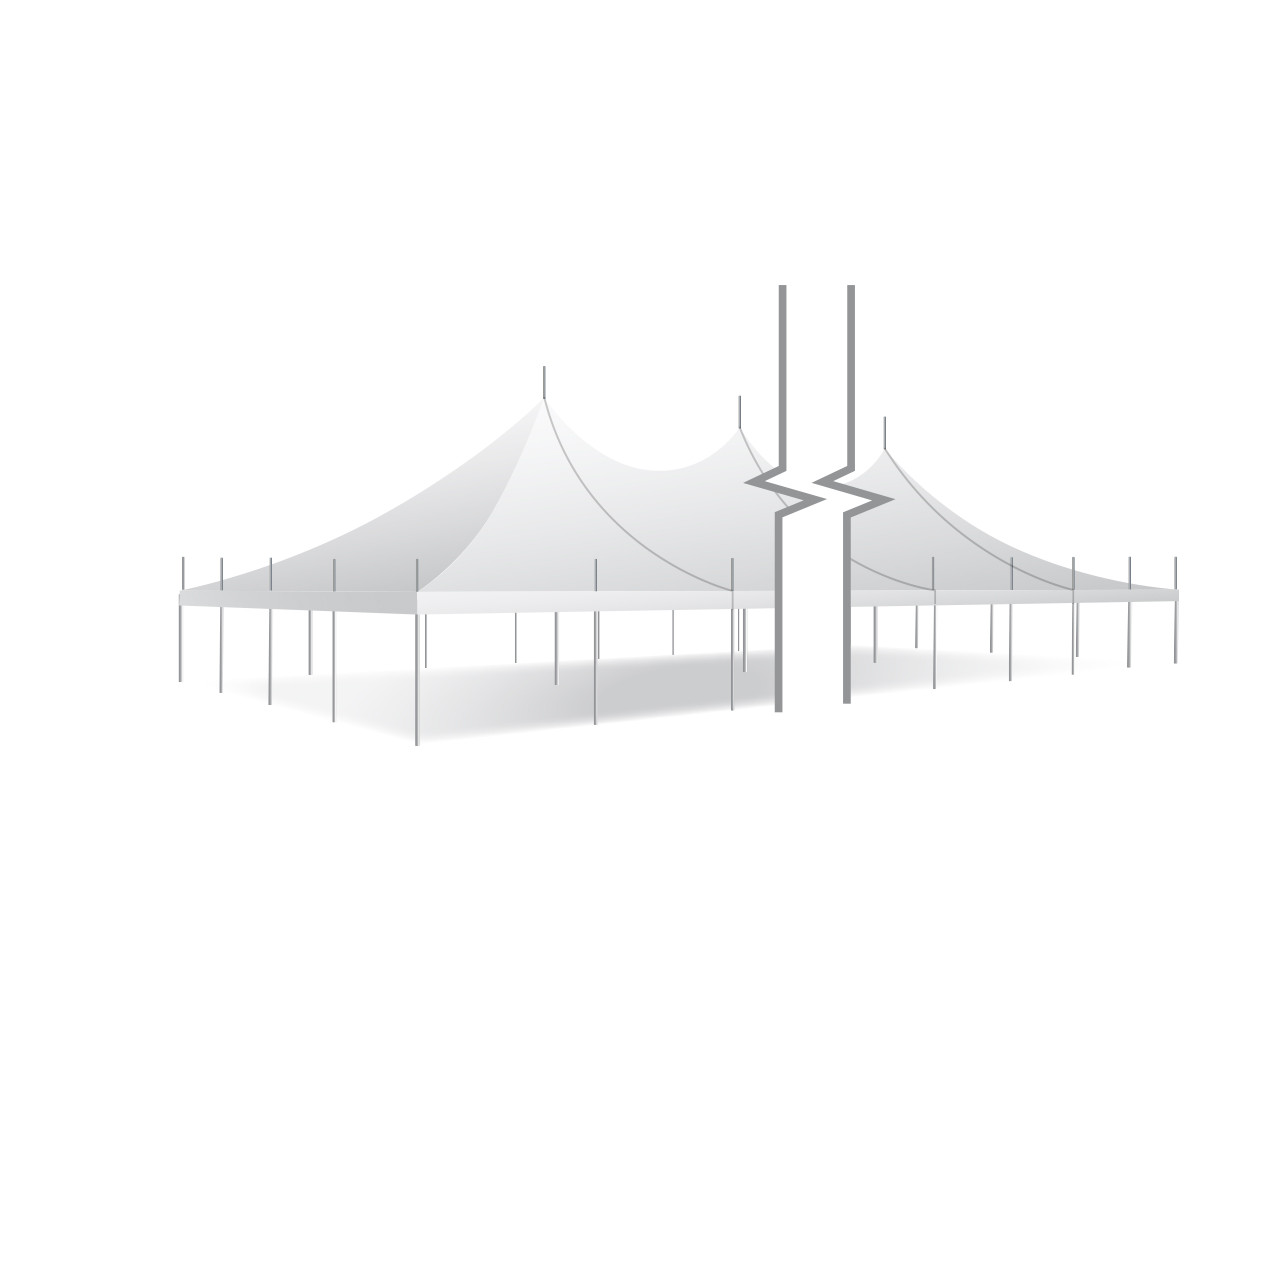 40' x 280' Premiere II Series High Peak Pole Tent, Sectional Tent Top, Complete